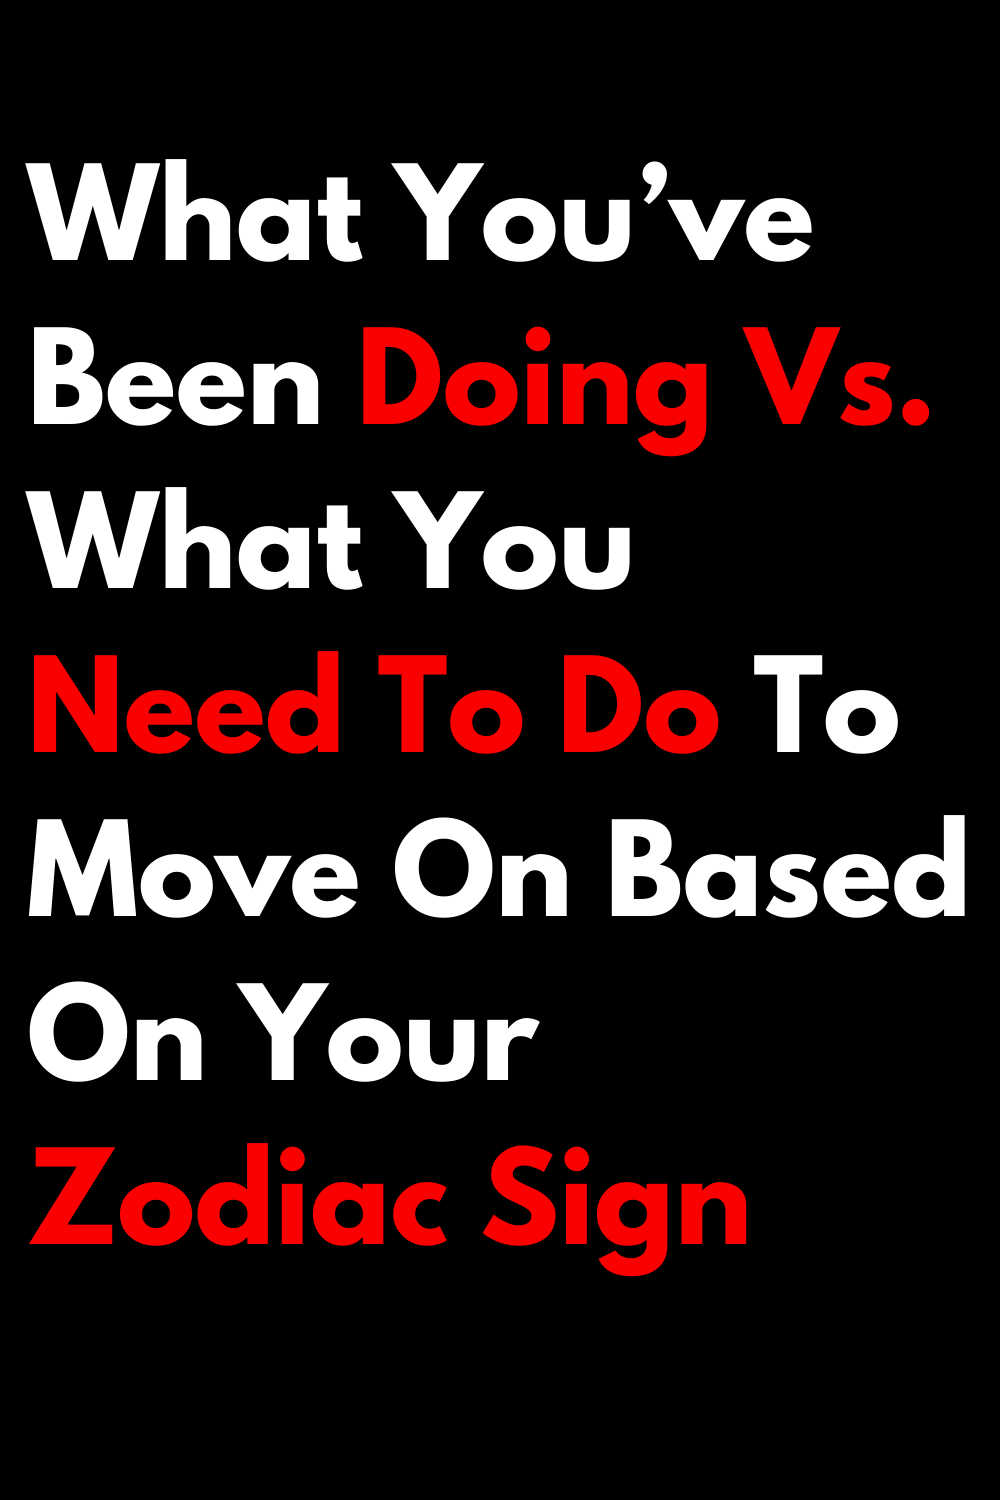 What You’ve Been Doing Vs. What You Need To Do To Move On Based On Your Zodiac Sign